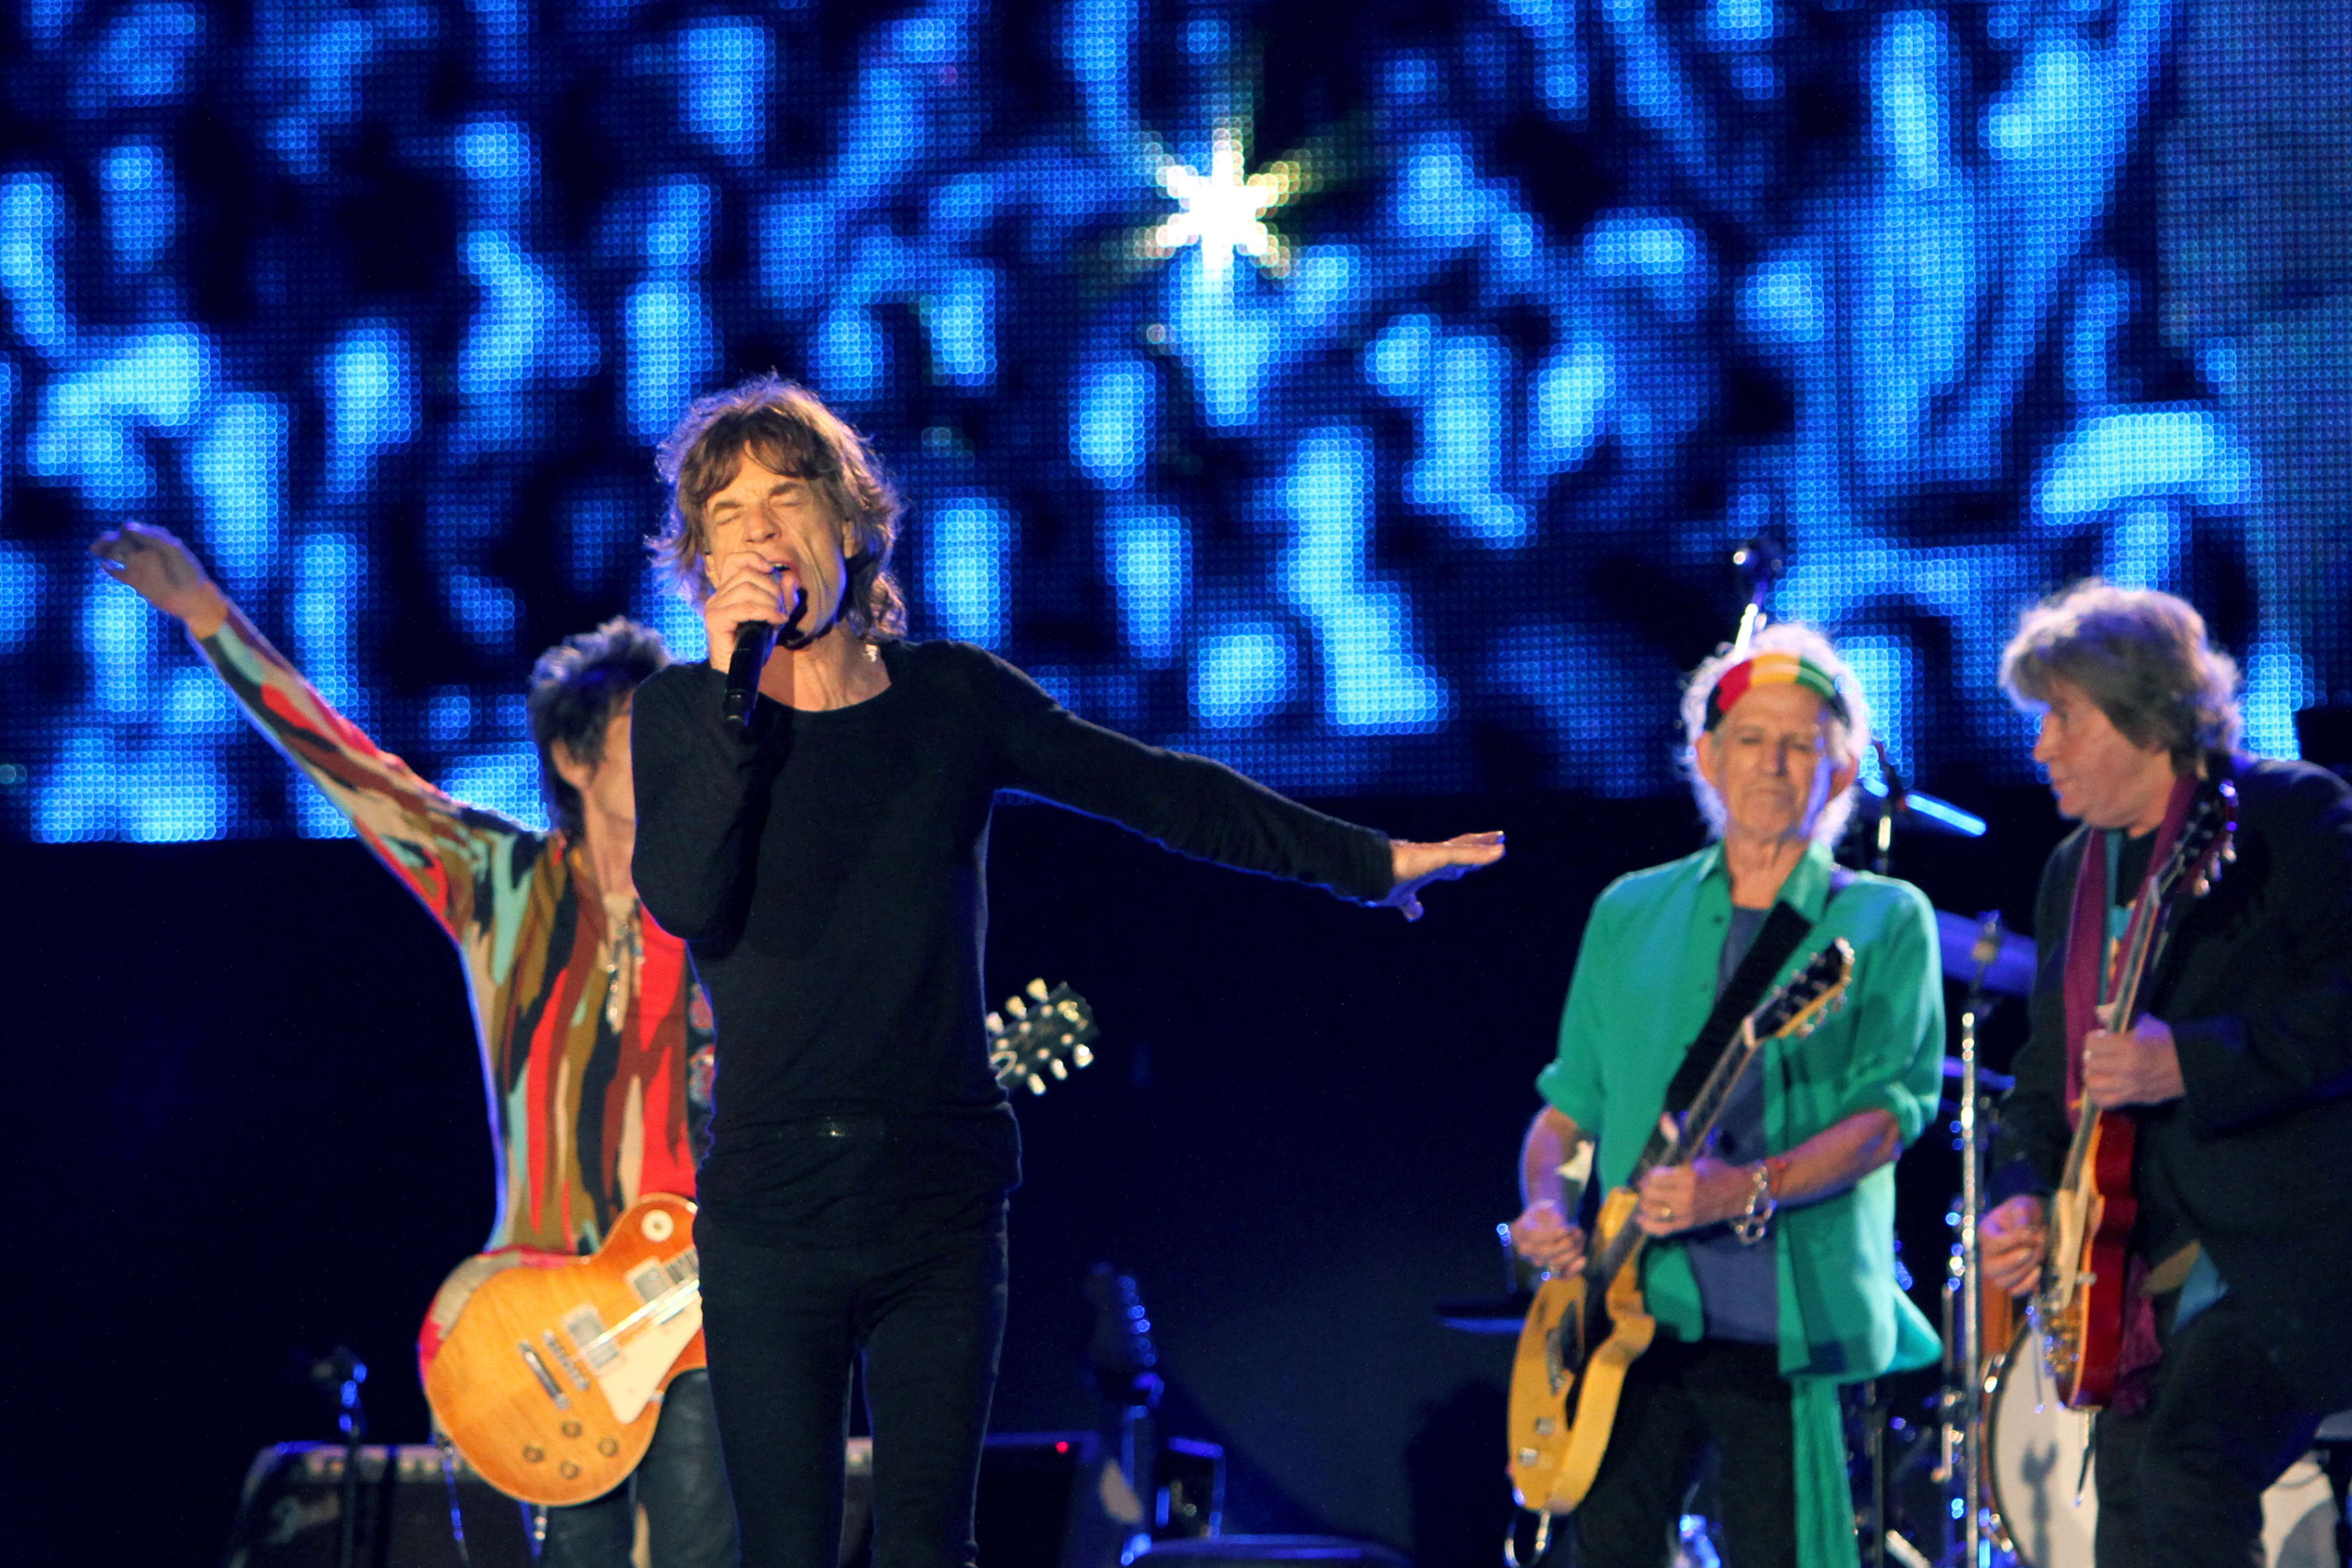 Rolling Stones concert goers to get schooled on lifetime income